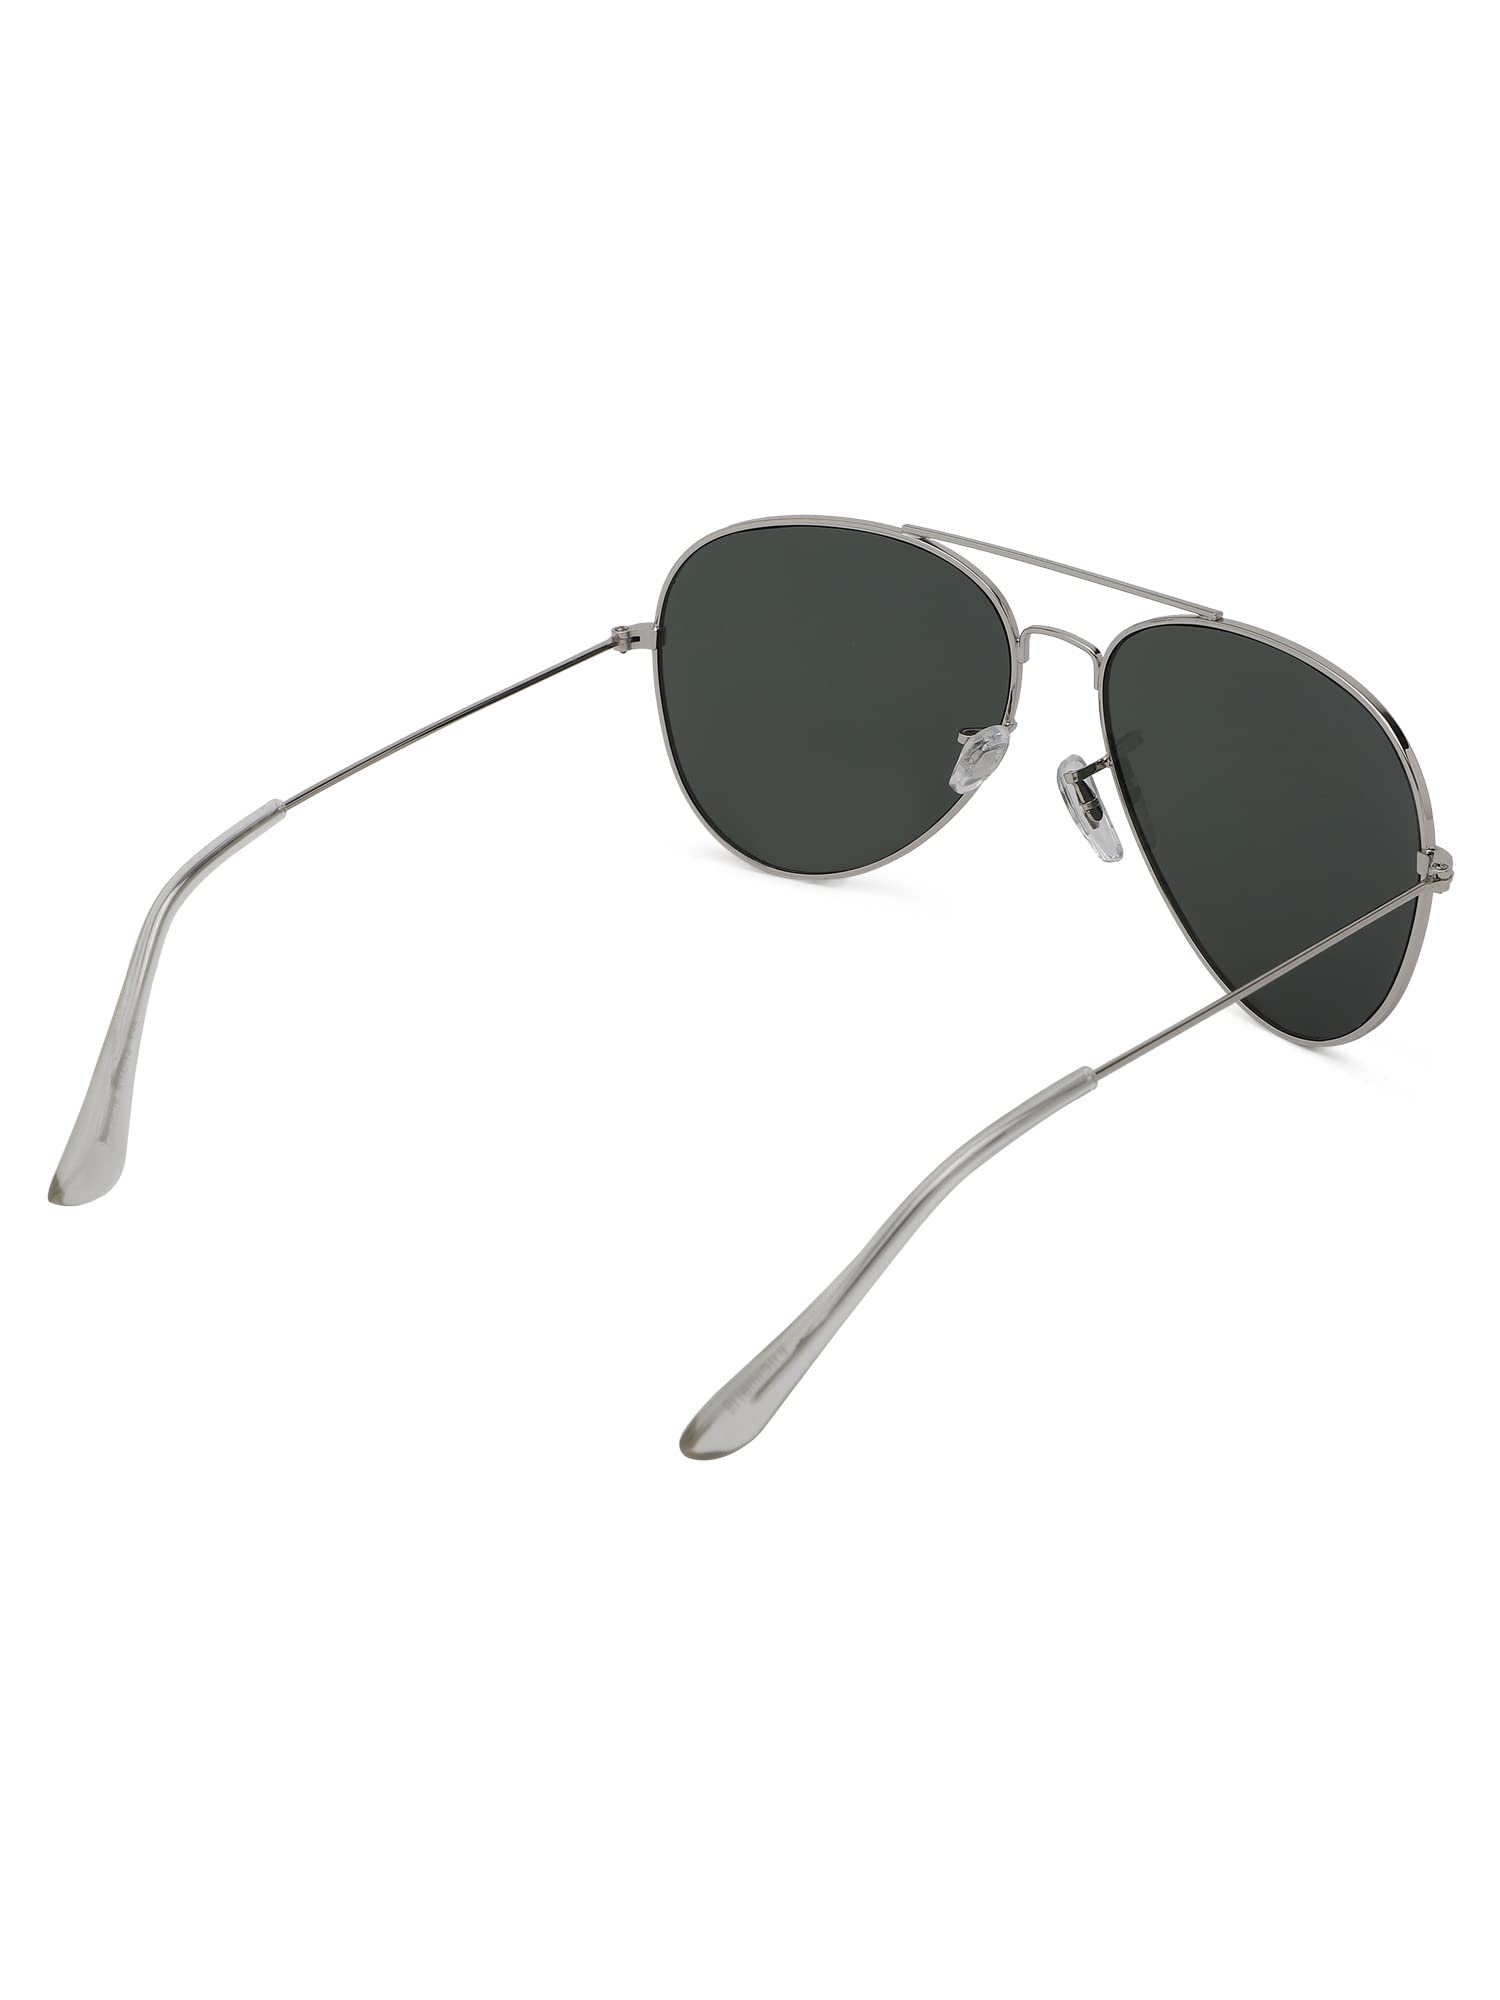 Classic Vintage Mirror Aviator Sunglasses For Men And Women-FunkyTradi –  FunkyTradition